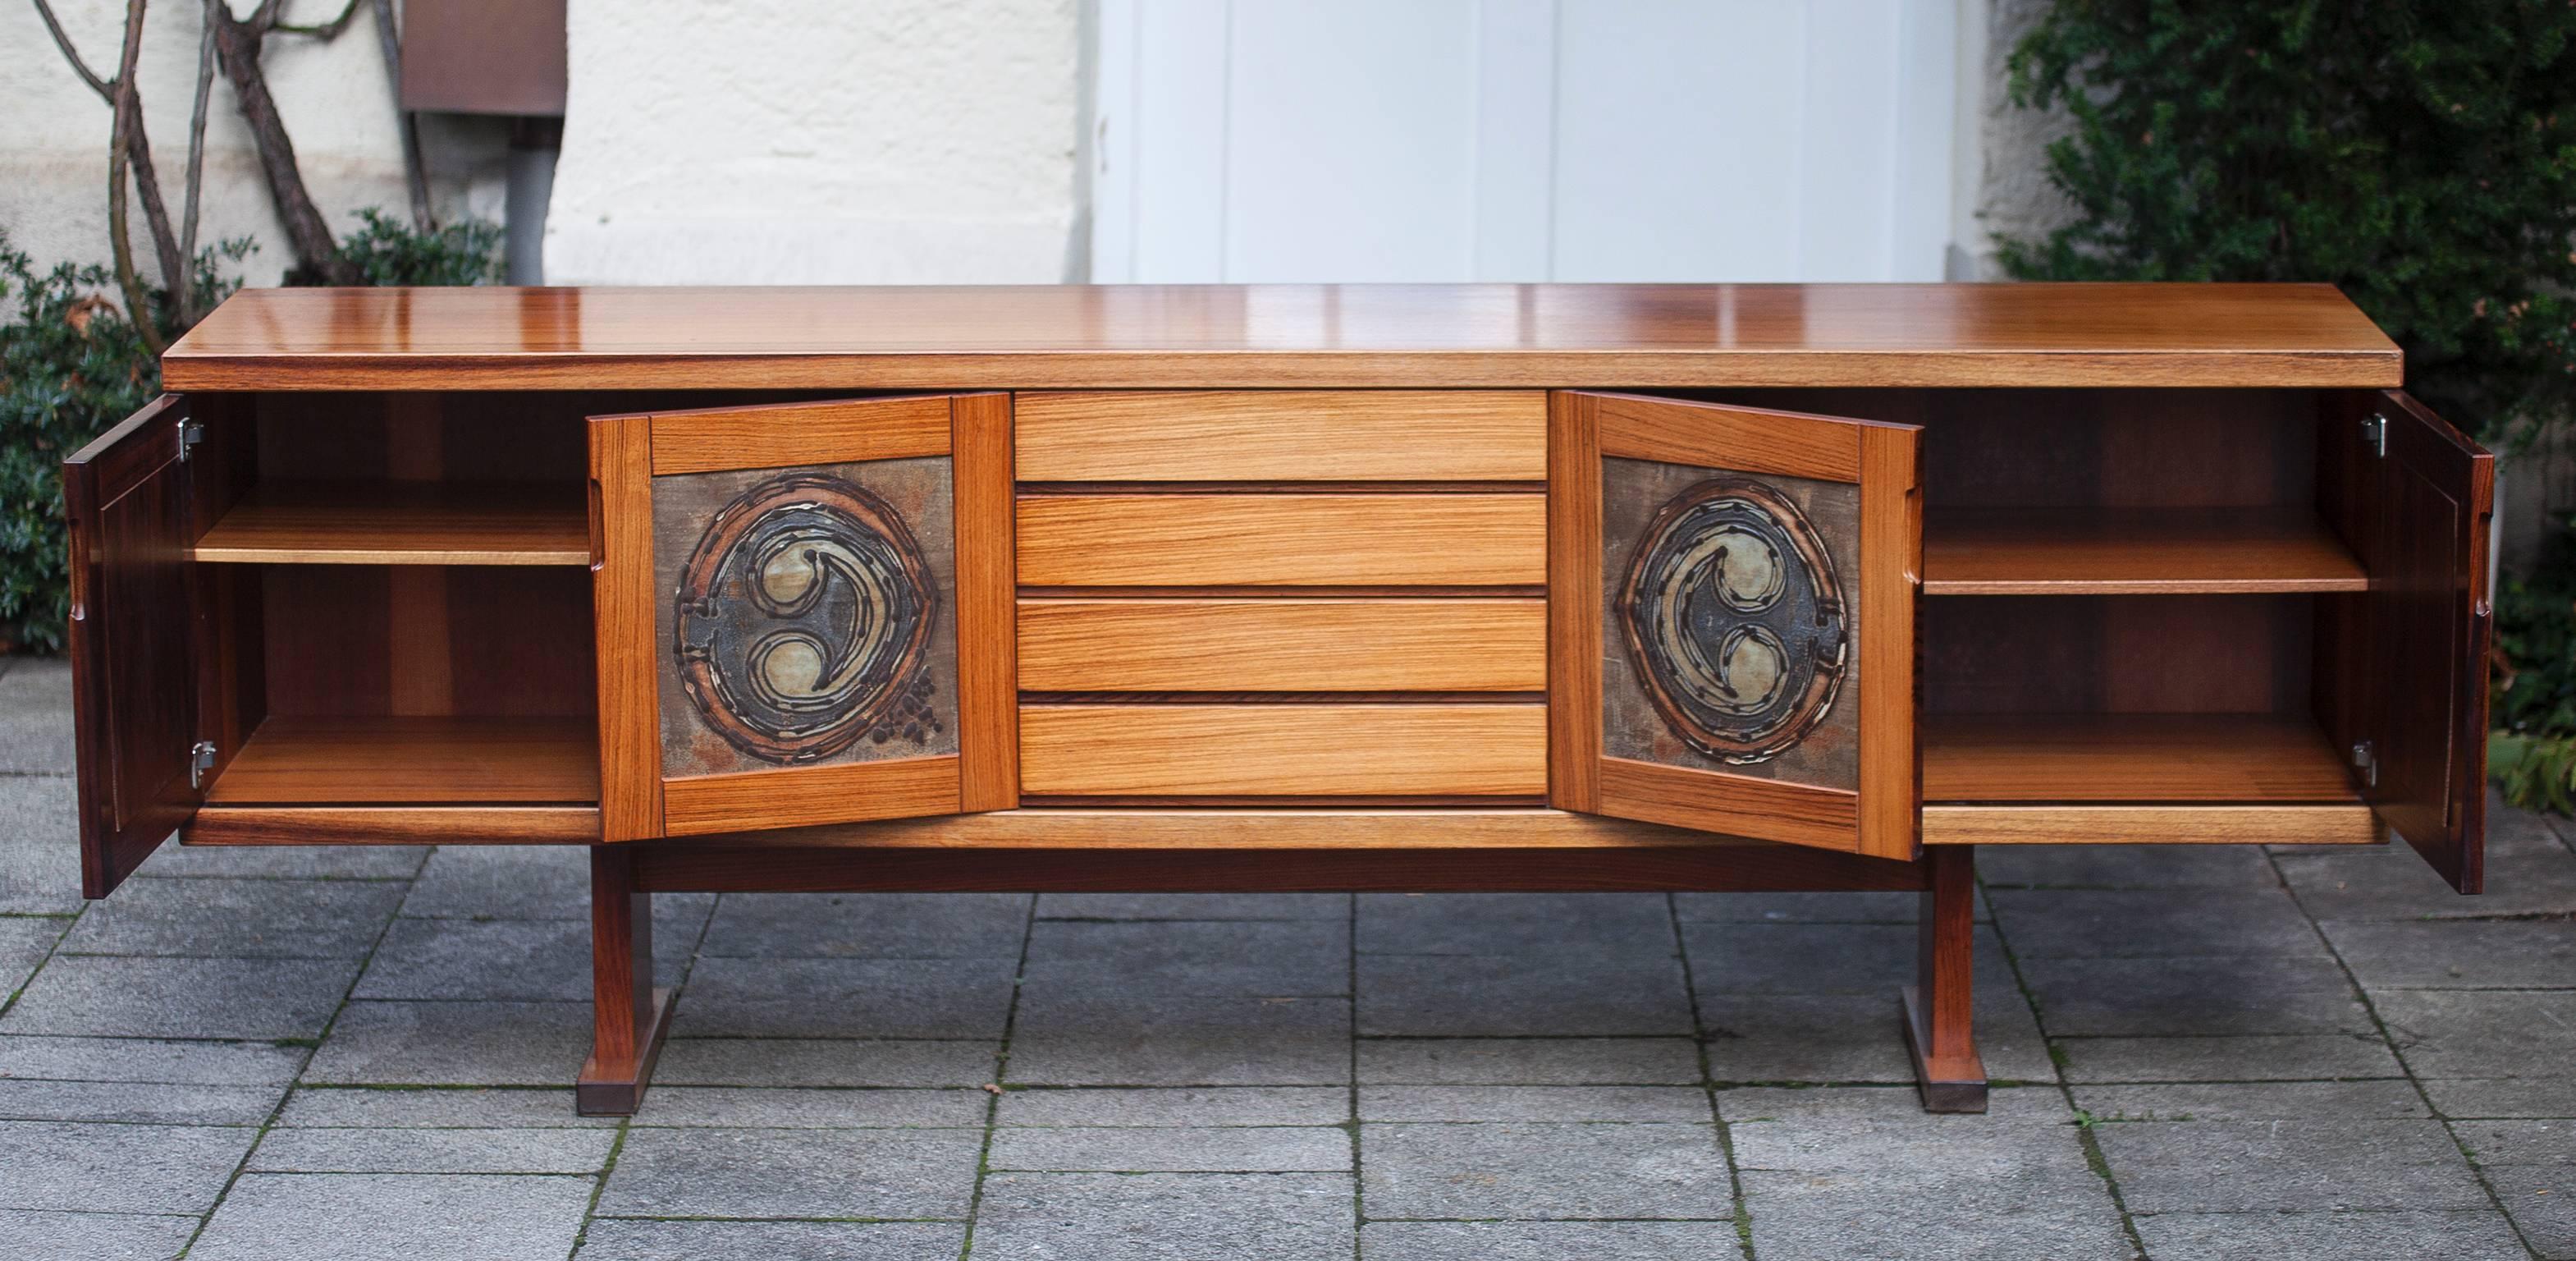 Rosewood sideboard with ceramic doors by Ox Art, Denmark, 1978.
Measures: H 76 W 215 D 46.